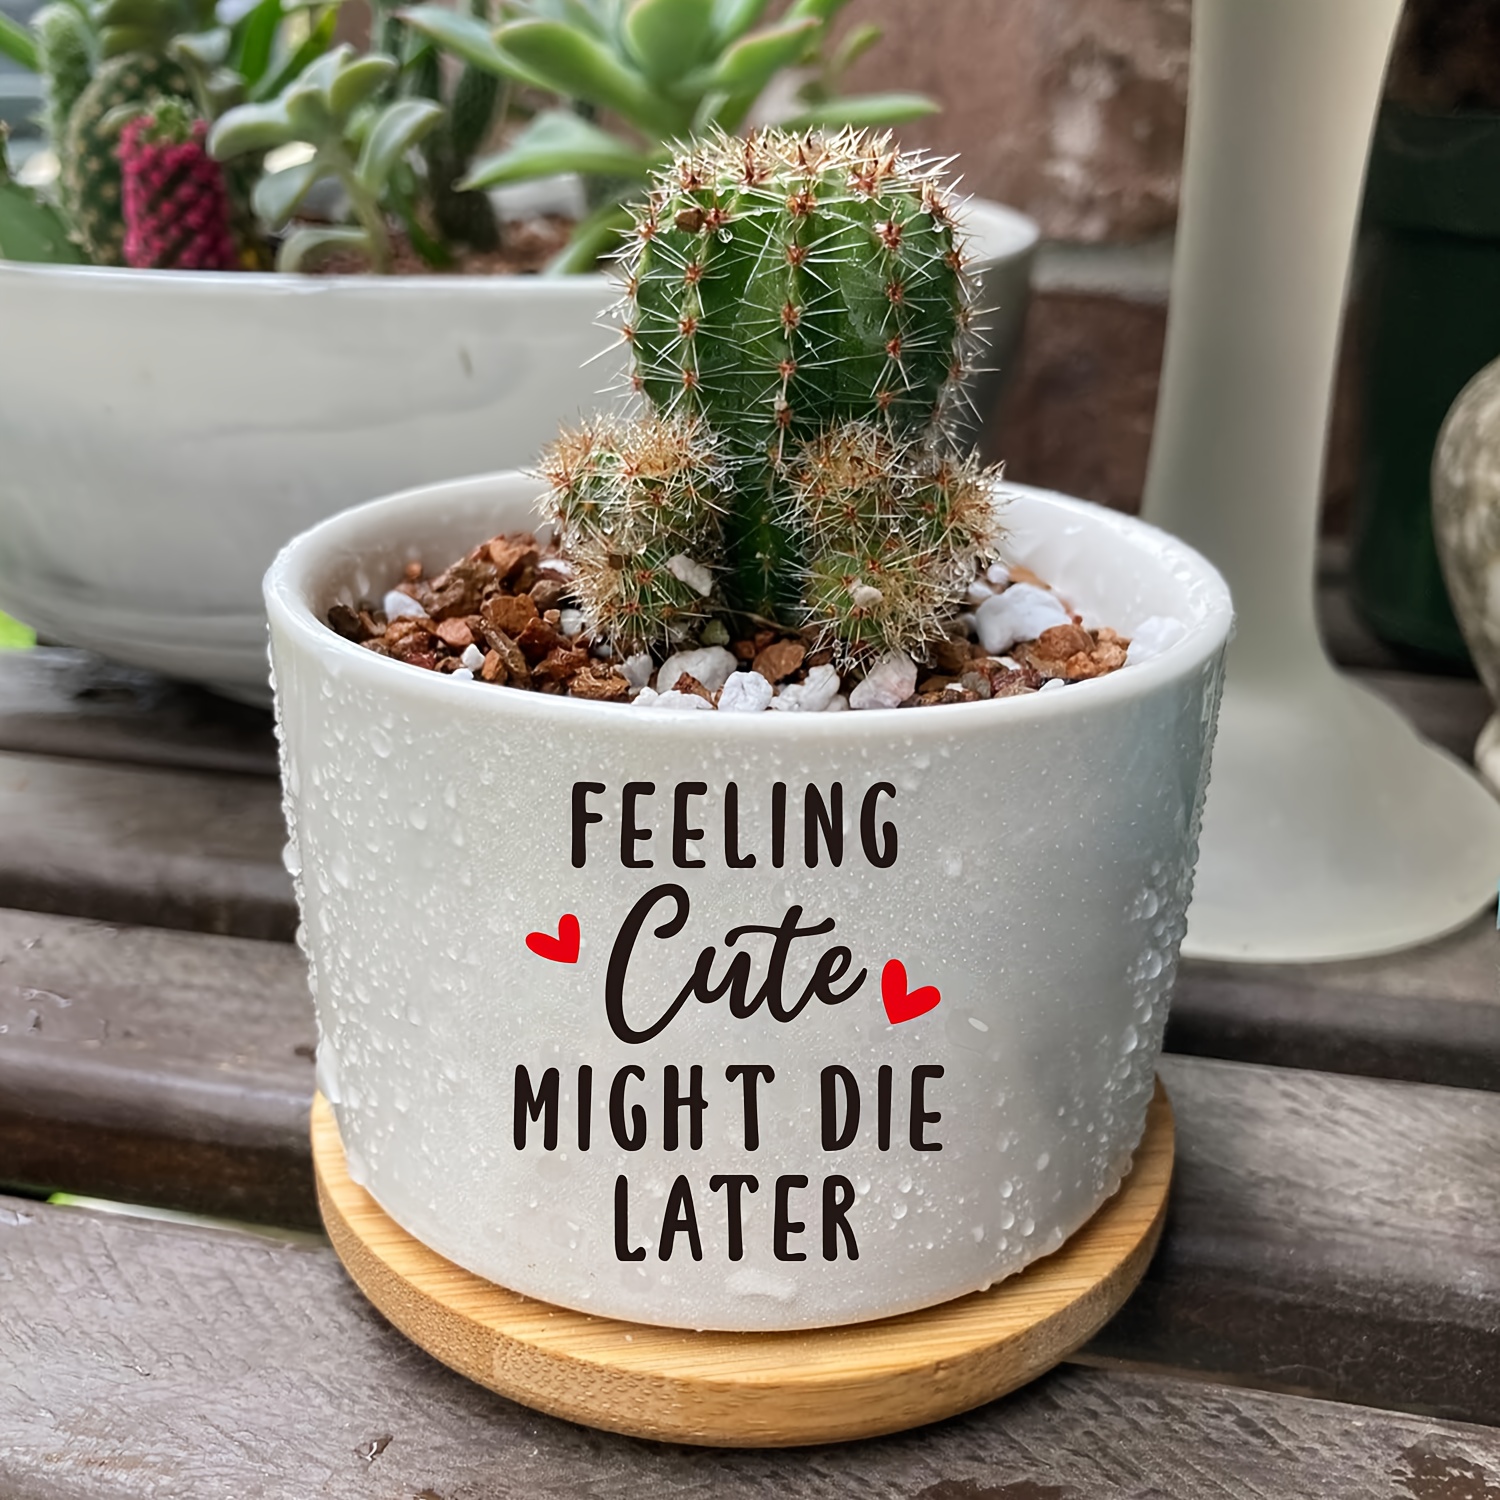 

Charming White Ceramic Succulent & Cactus Planter - 'feeling Cute Might Die Later' Engraved, Indoor/outdoor Use, Drainage Hole Included (plant Not Included)